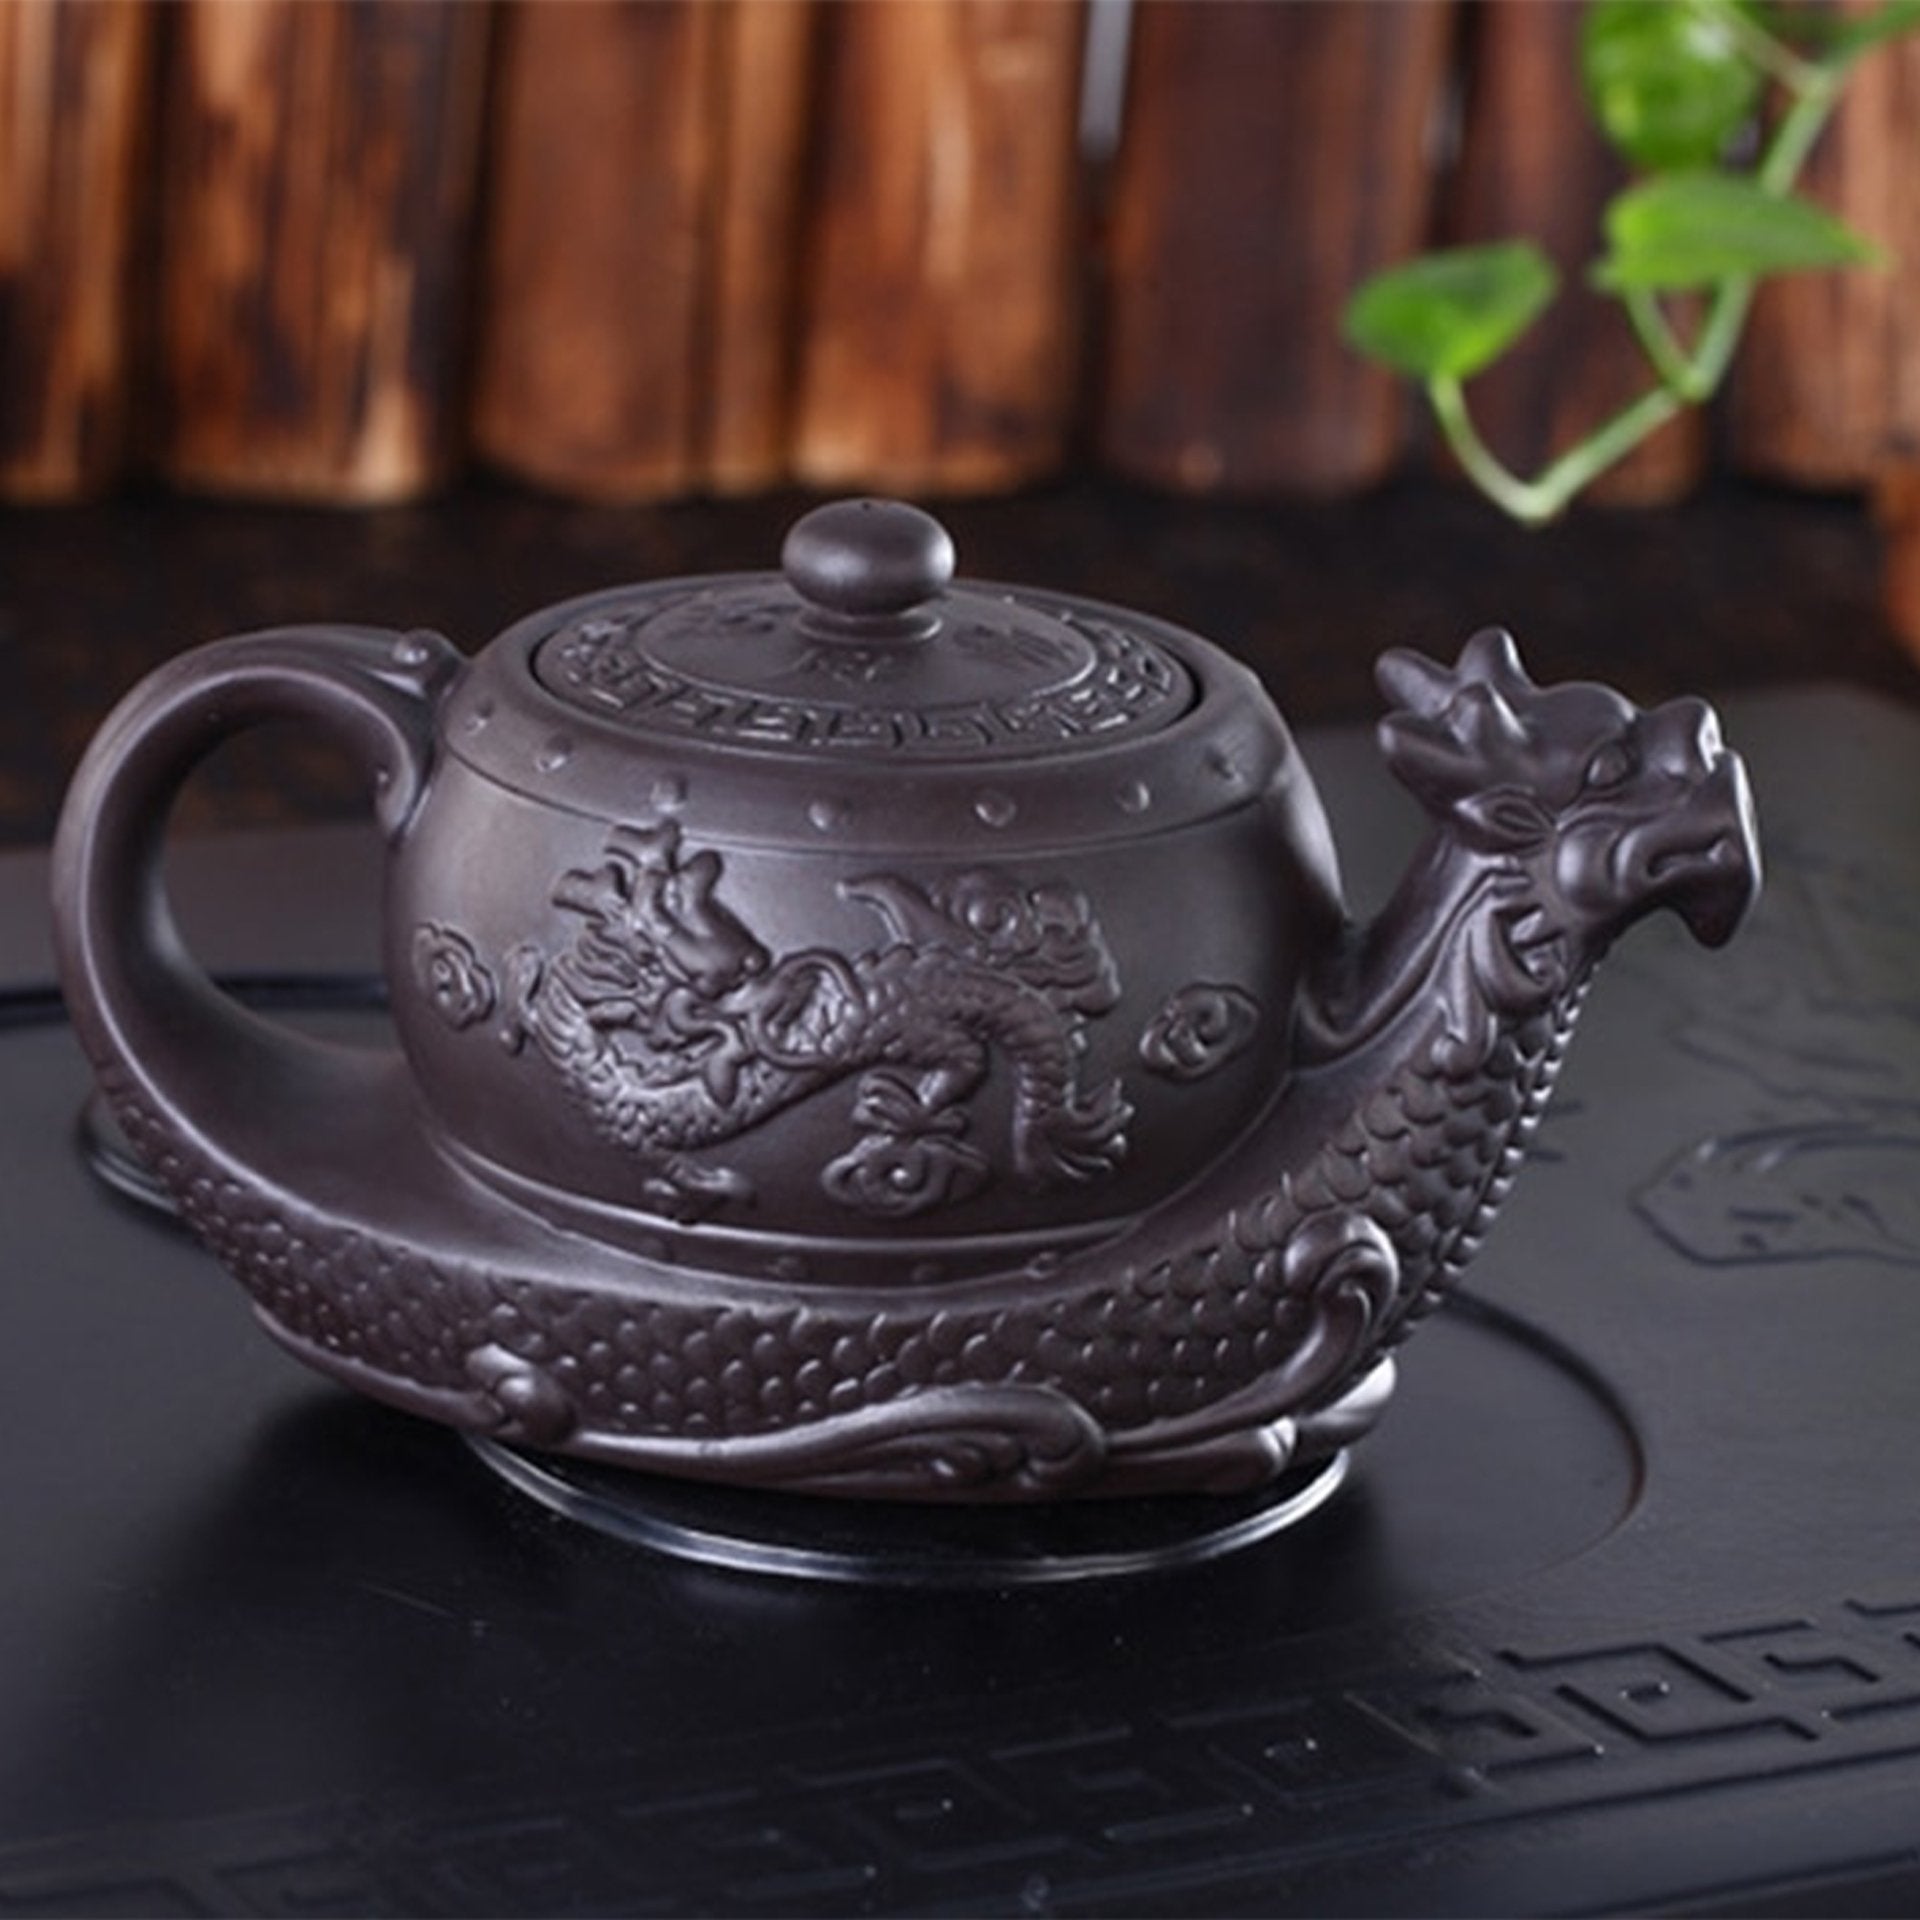 Full view of dark dragon teapot with intricate designs and robust handle.